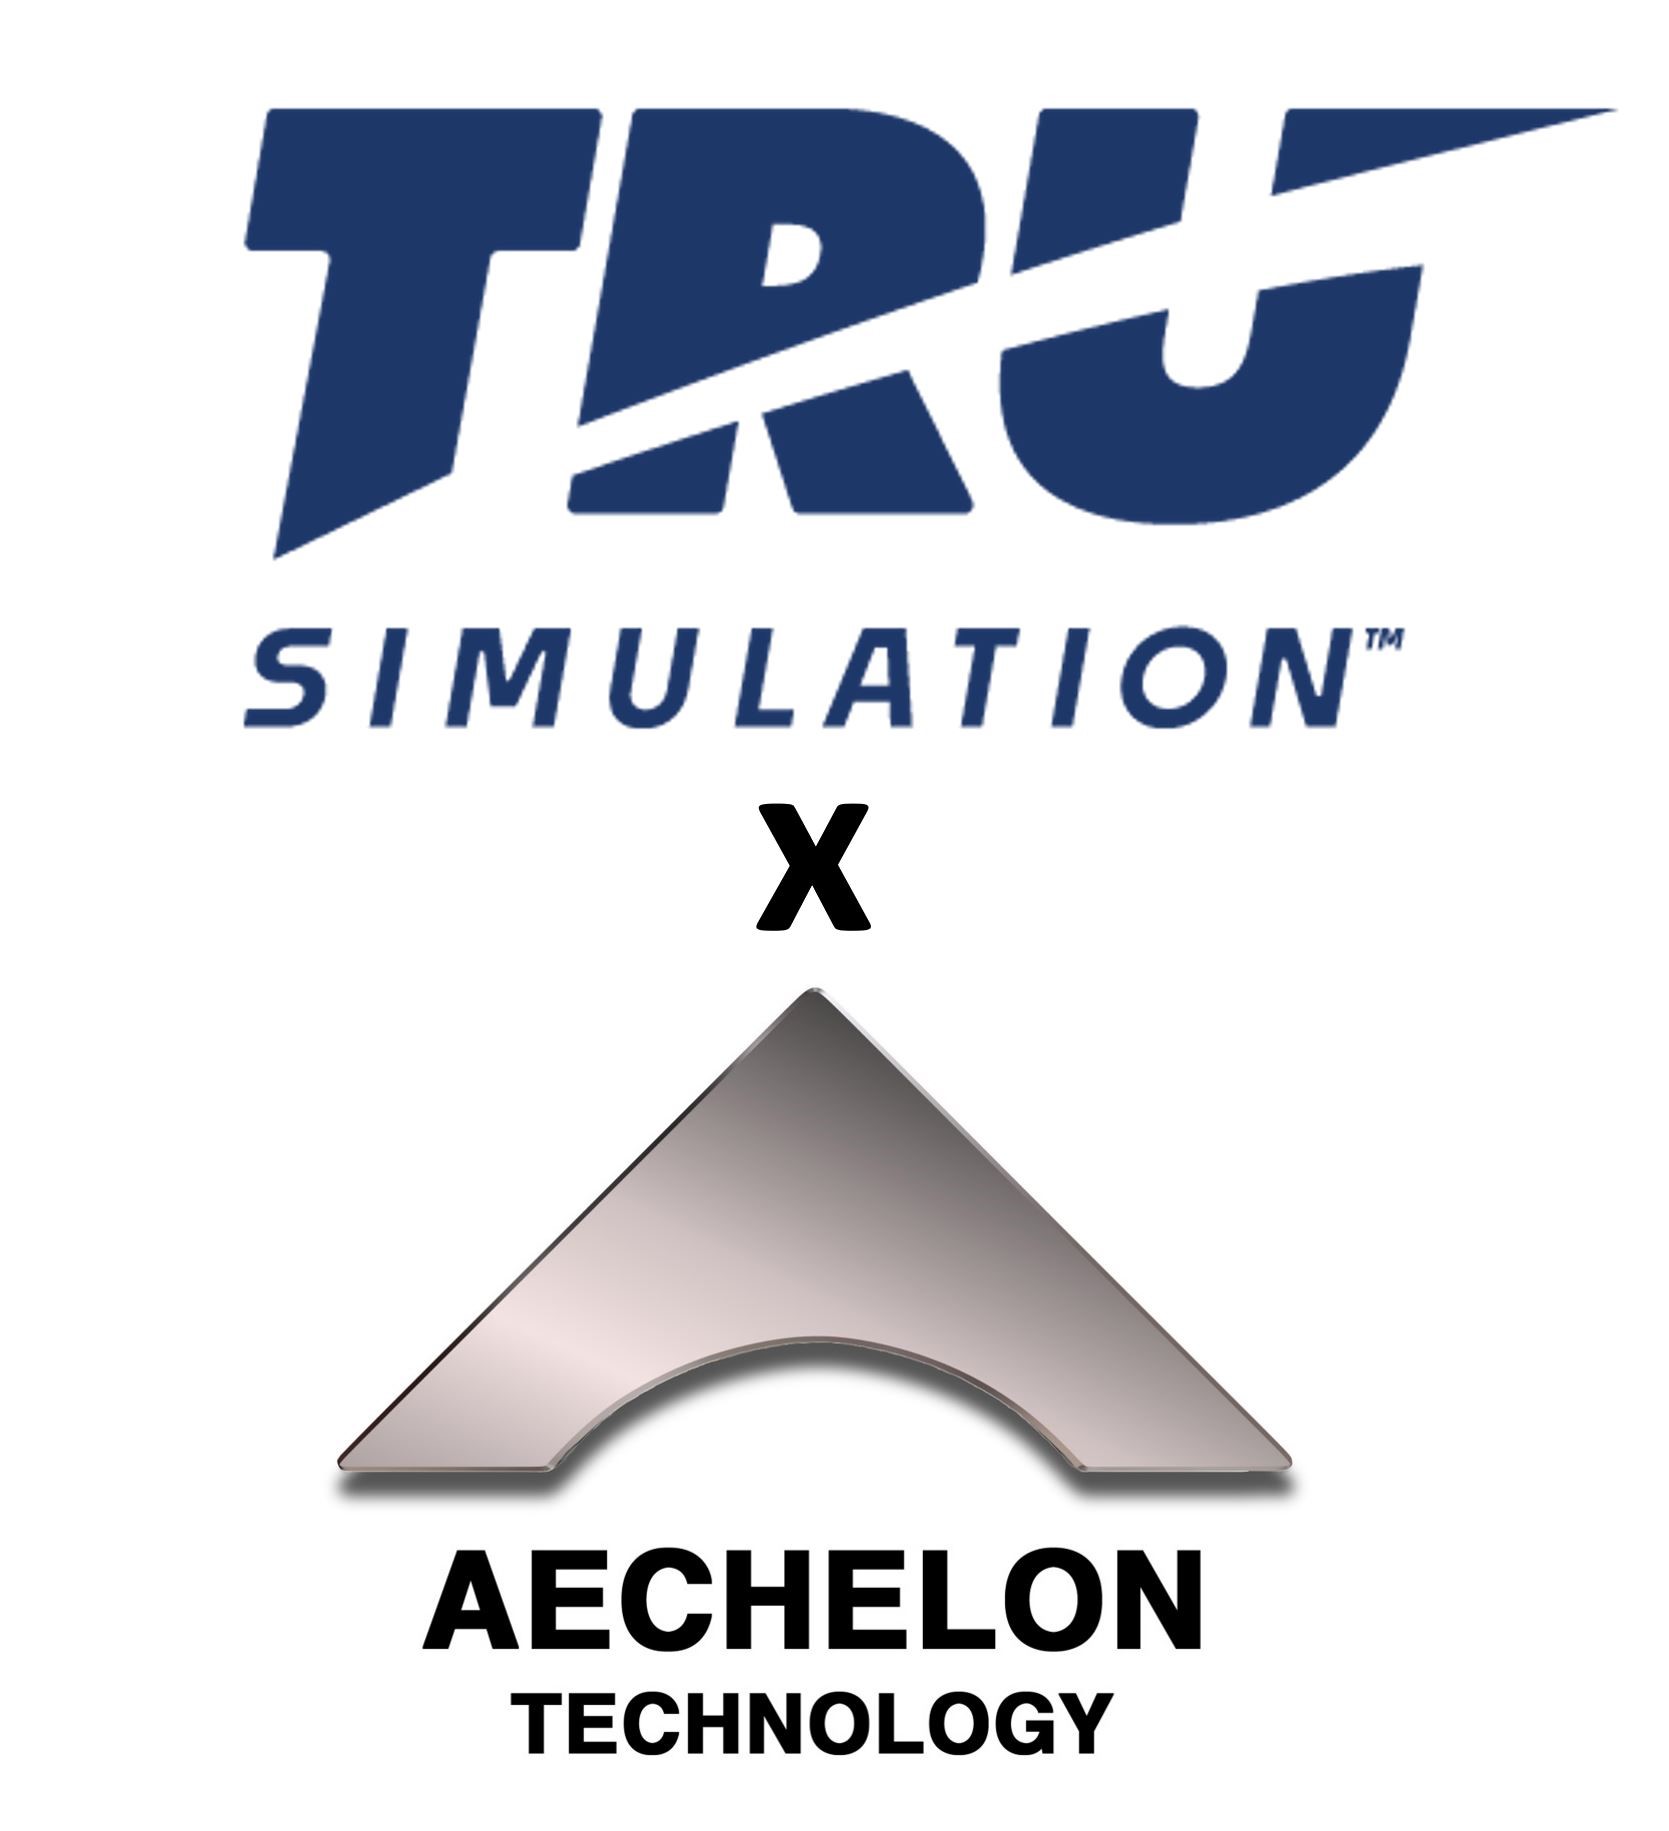 Aechelon Technology Receives Contract from TRU Simulation in support of the US Naval Air Warfare Center, Training Systems Division’s Multi-Engine Training System (METS) Ground Based Training Systems (GBTS) Simulator Program